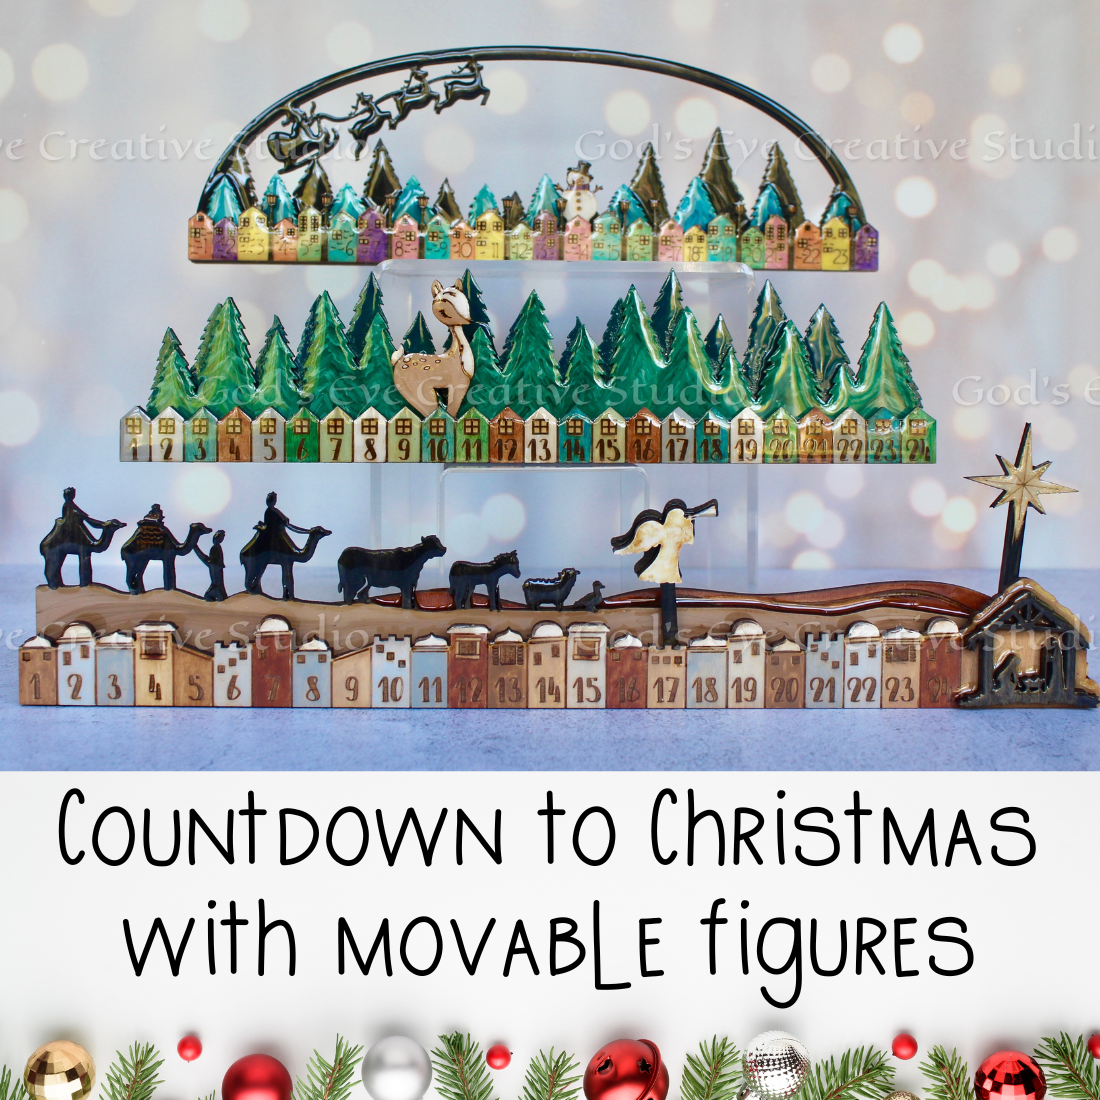 Countdown to Christmas with movable figures